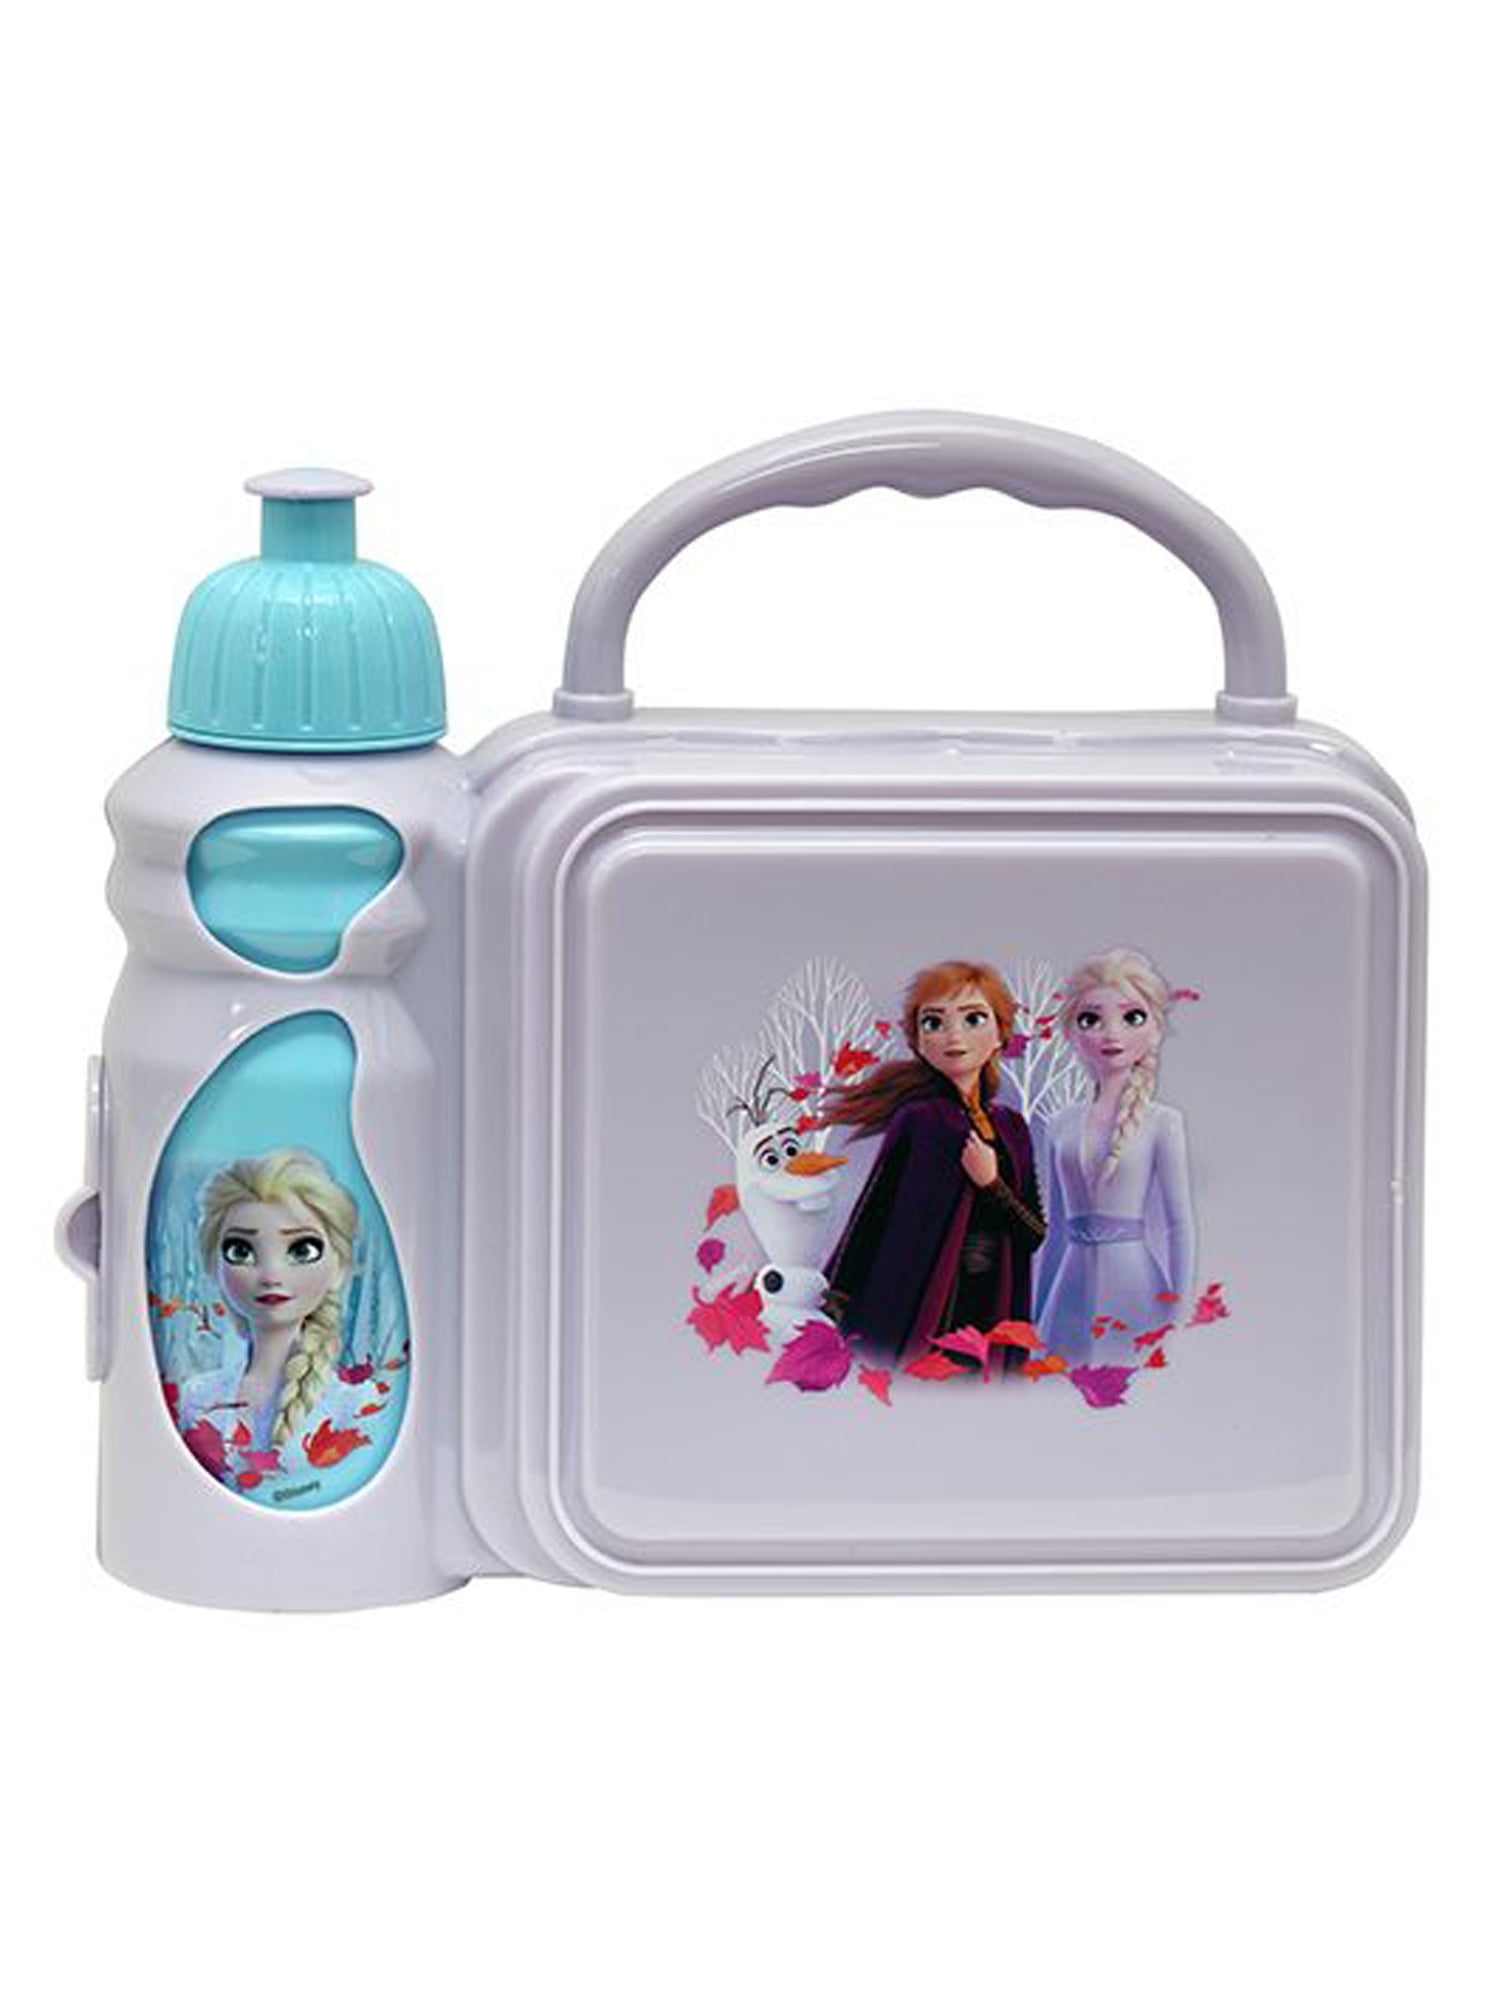 26406 Elsa Anna Large Tin Tote Lunch Box Container School Disney Frozen Sisters